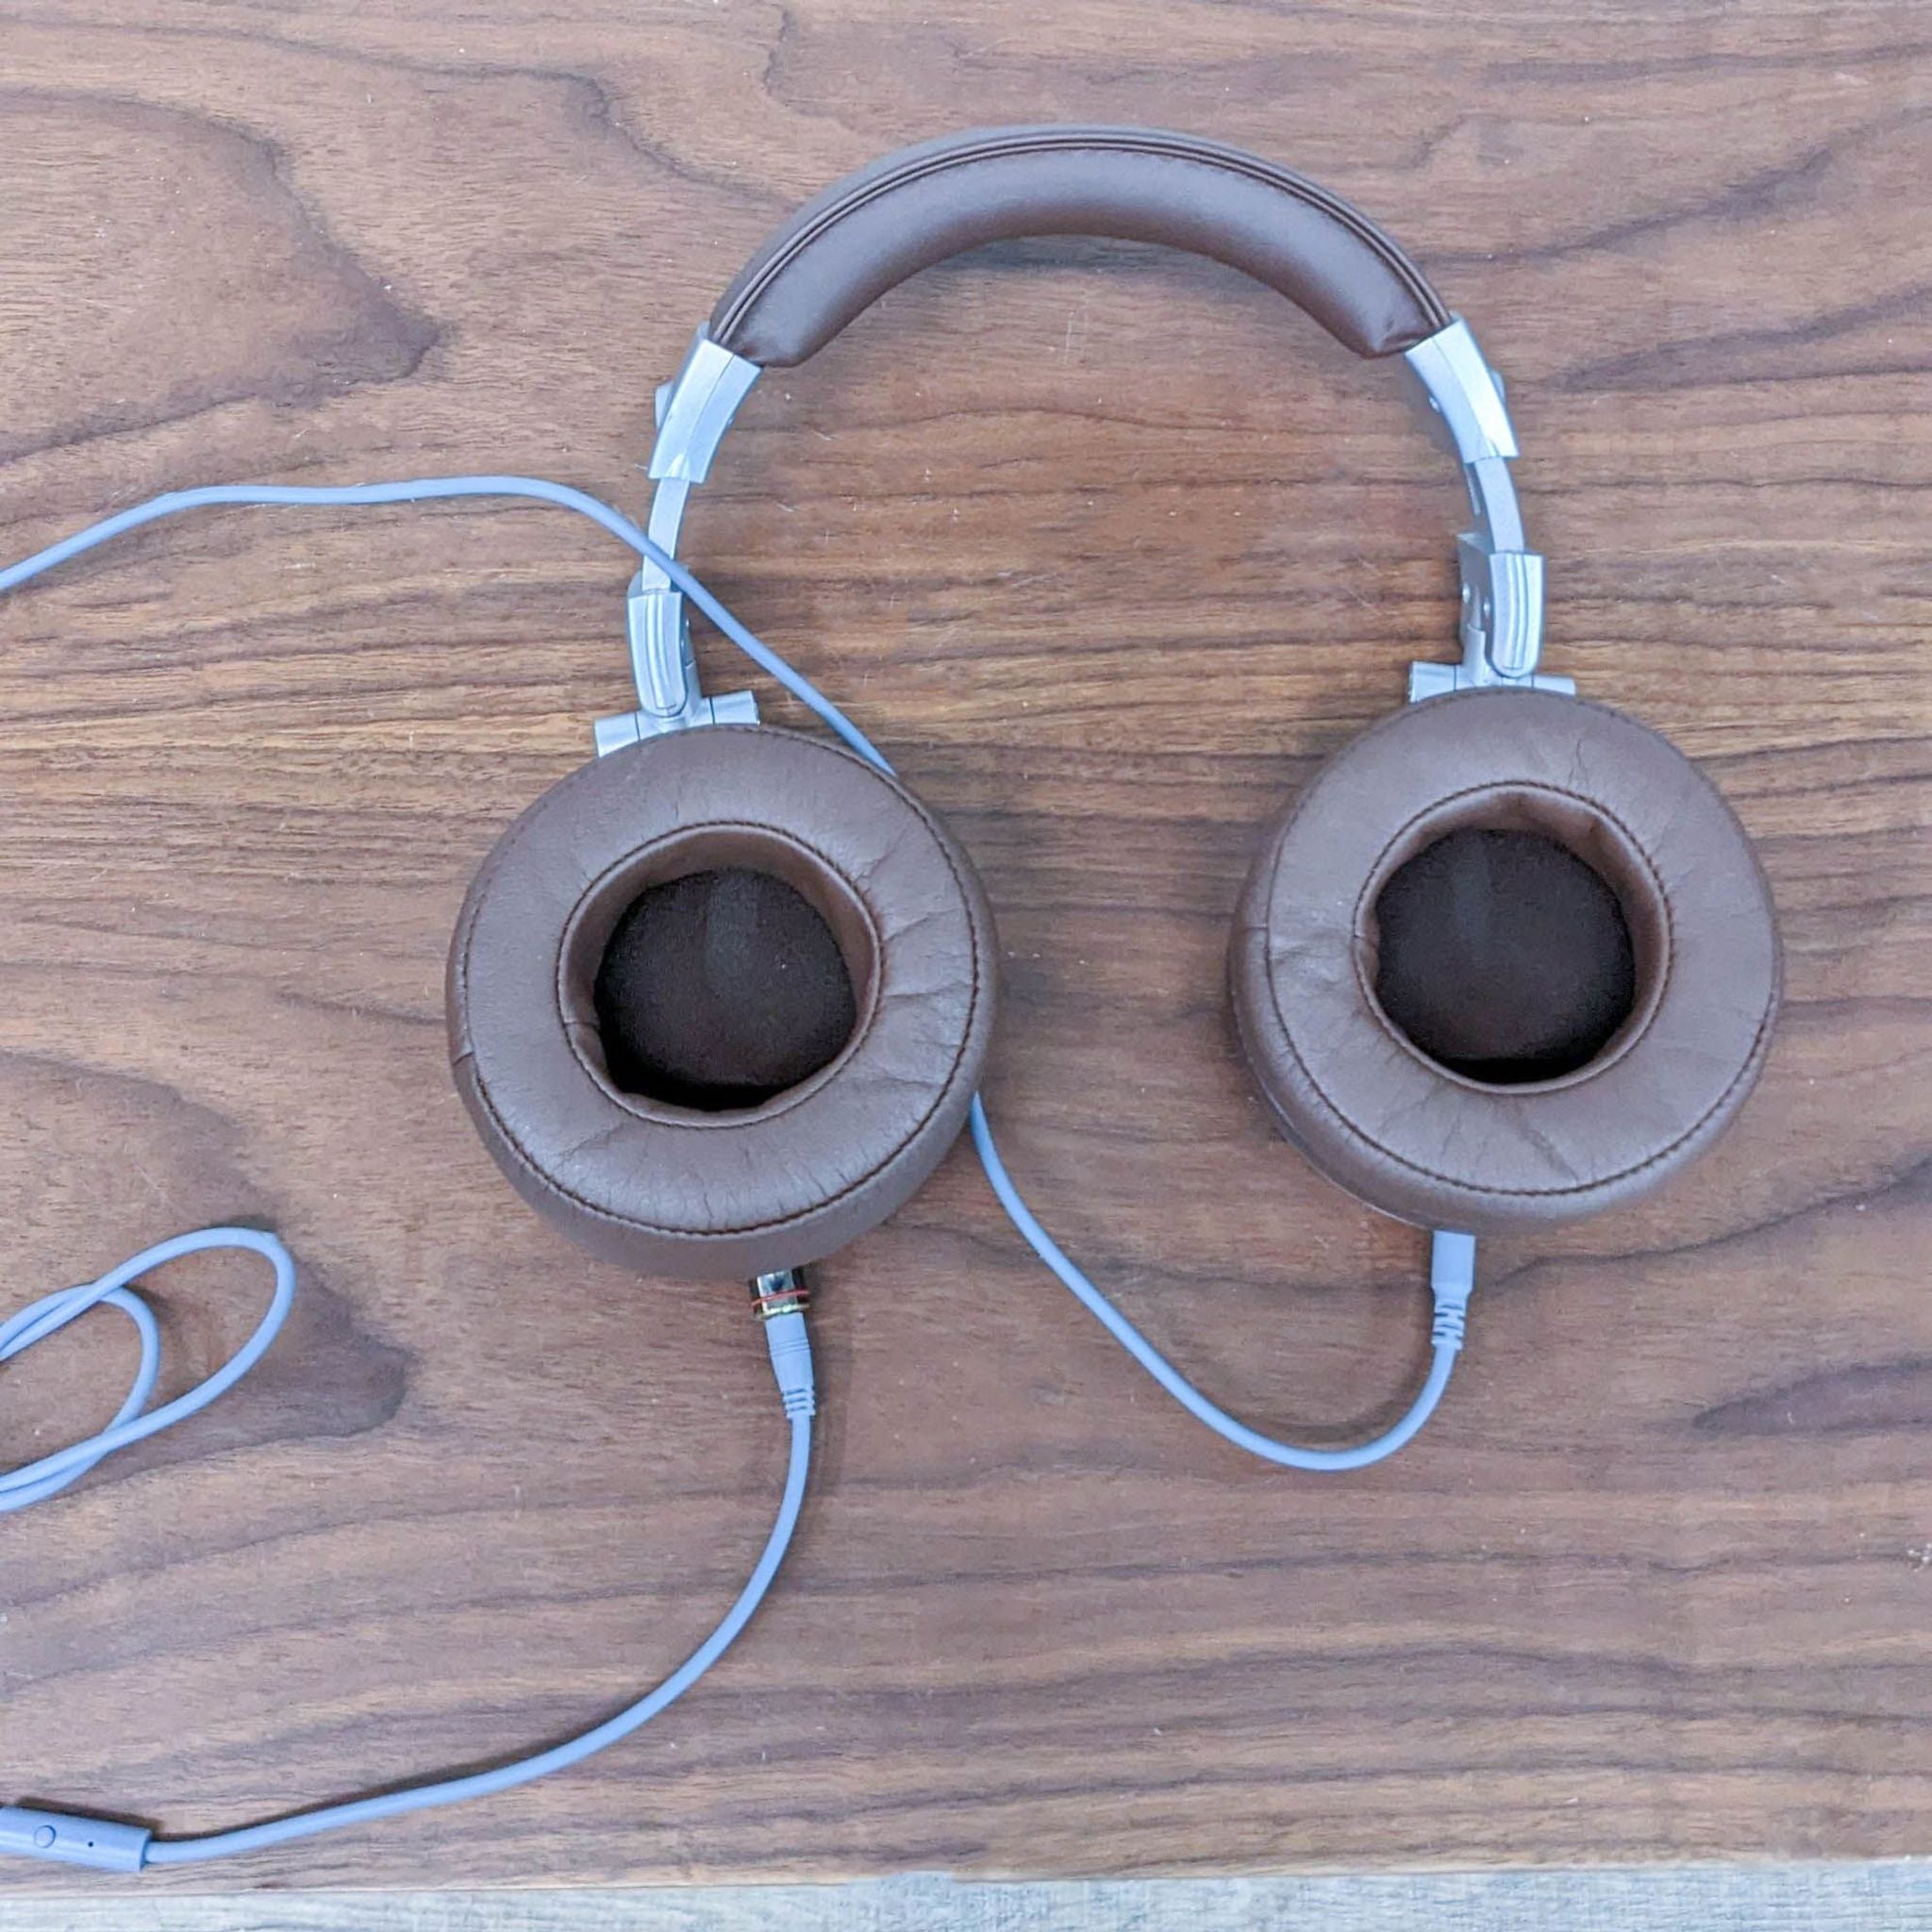 Brown leather cushioned OneOdio headphones viewed from top, showcasing comfortable ear cups, on wood.